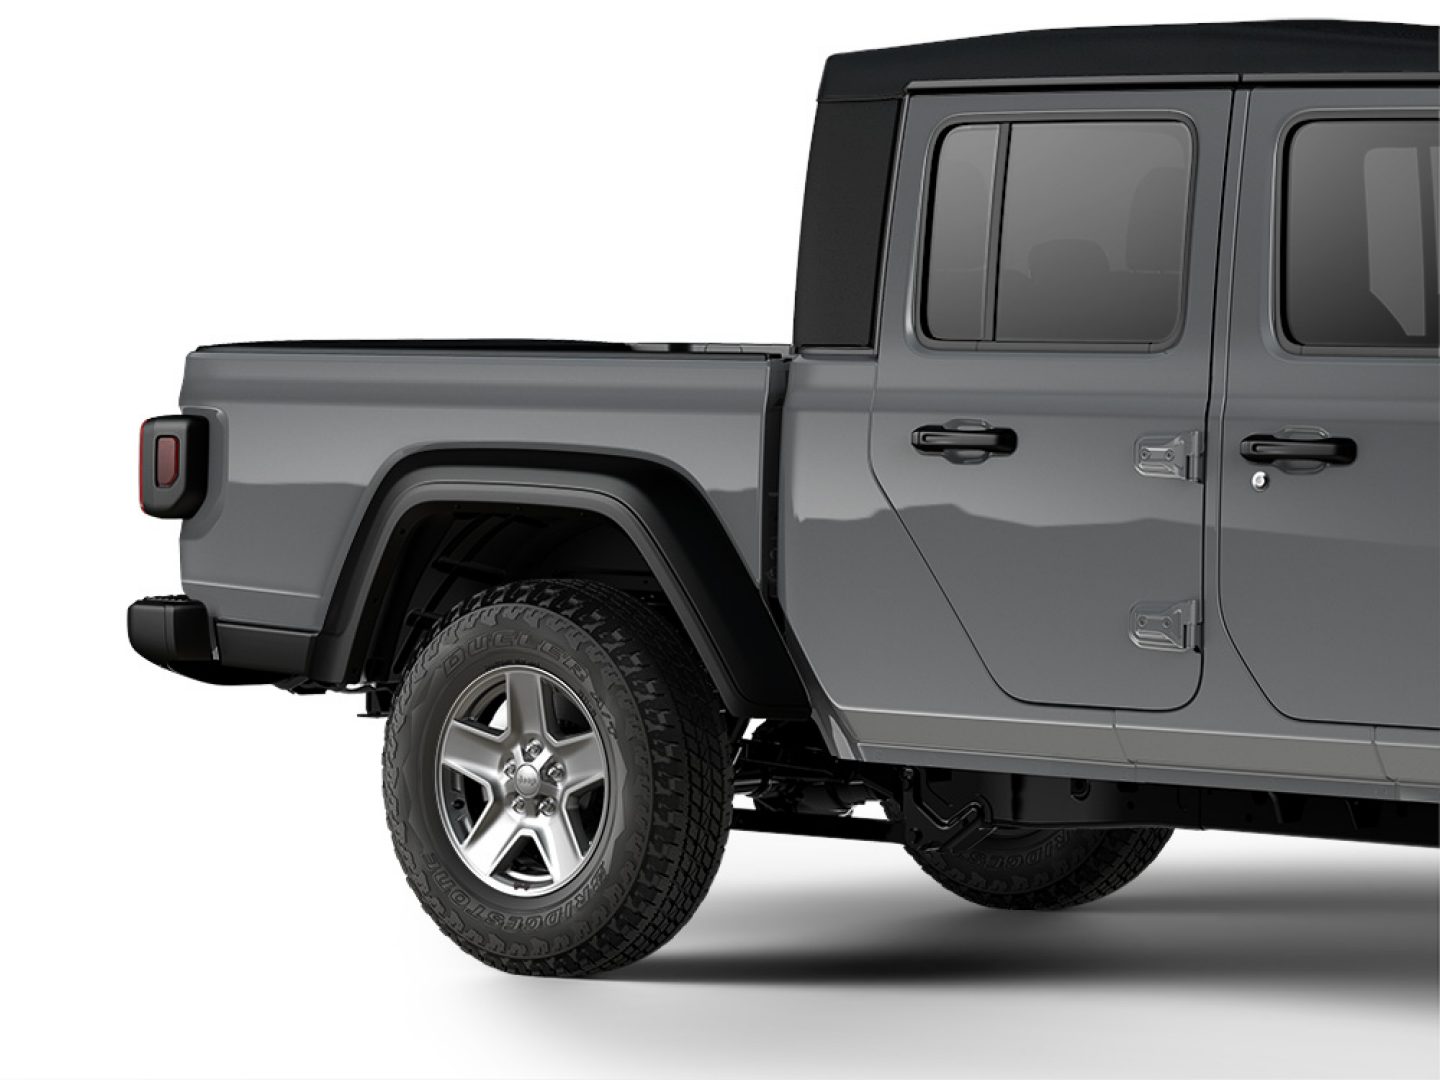 Jeep Gladiaor rear section with 17 Inch Aluminum Wheel